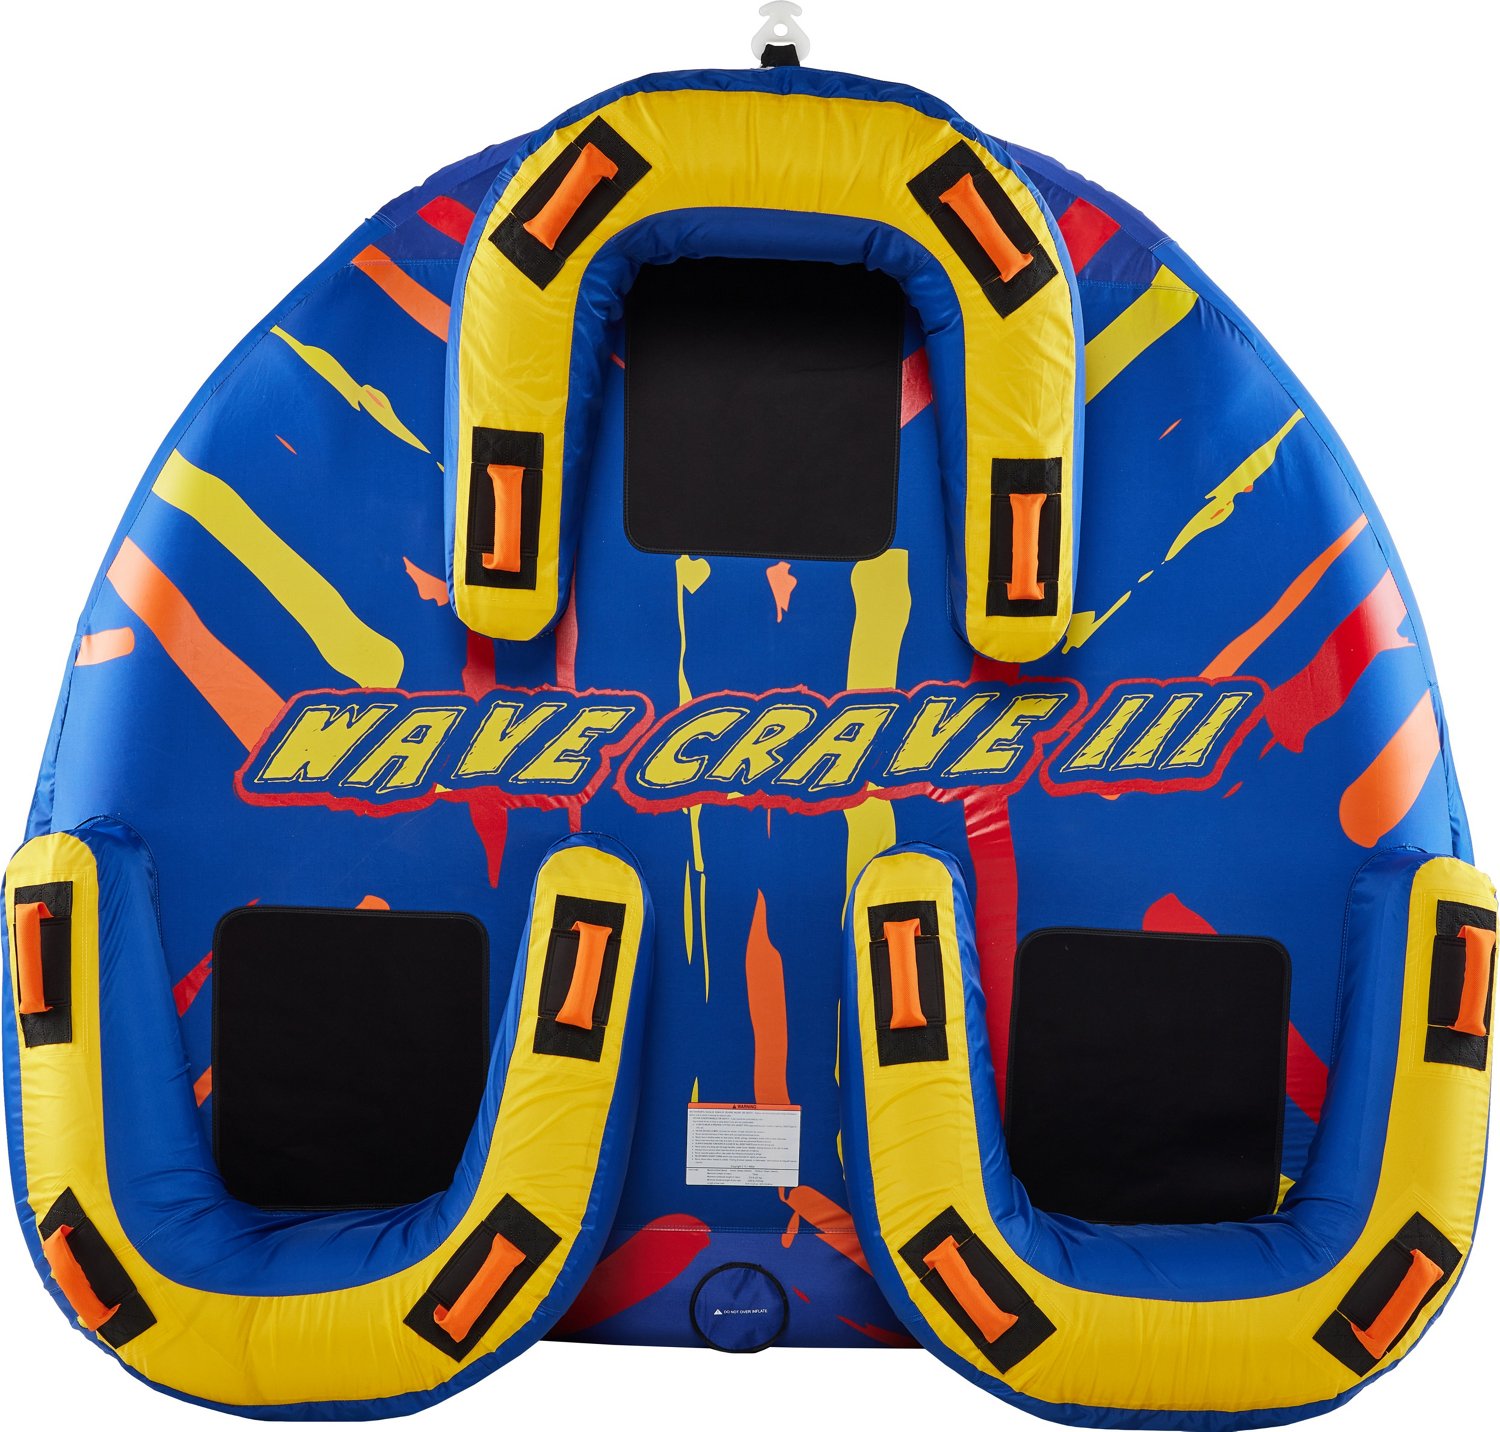 RAVE Sports Big Easy Inflatable Towable